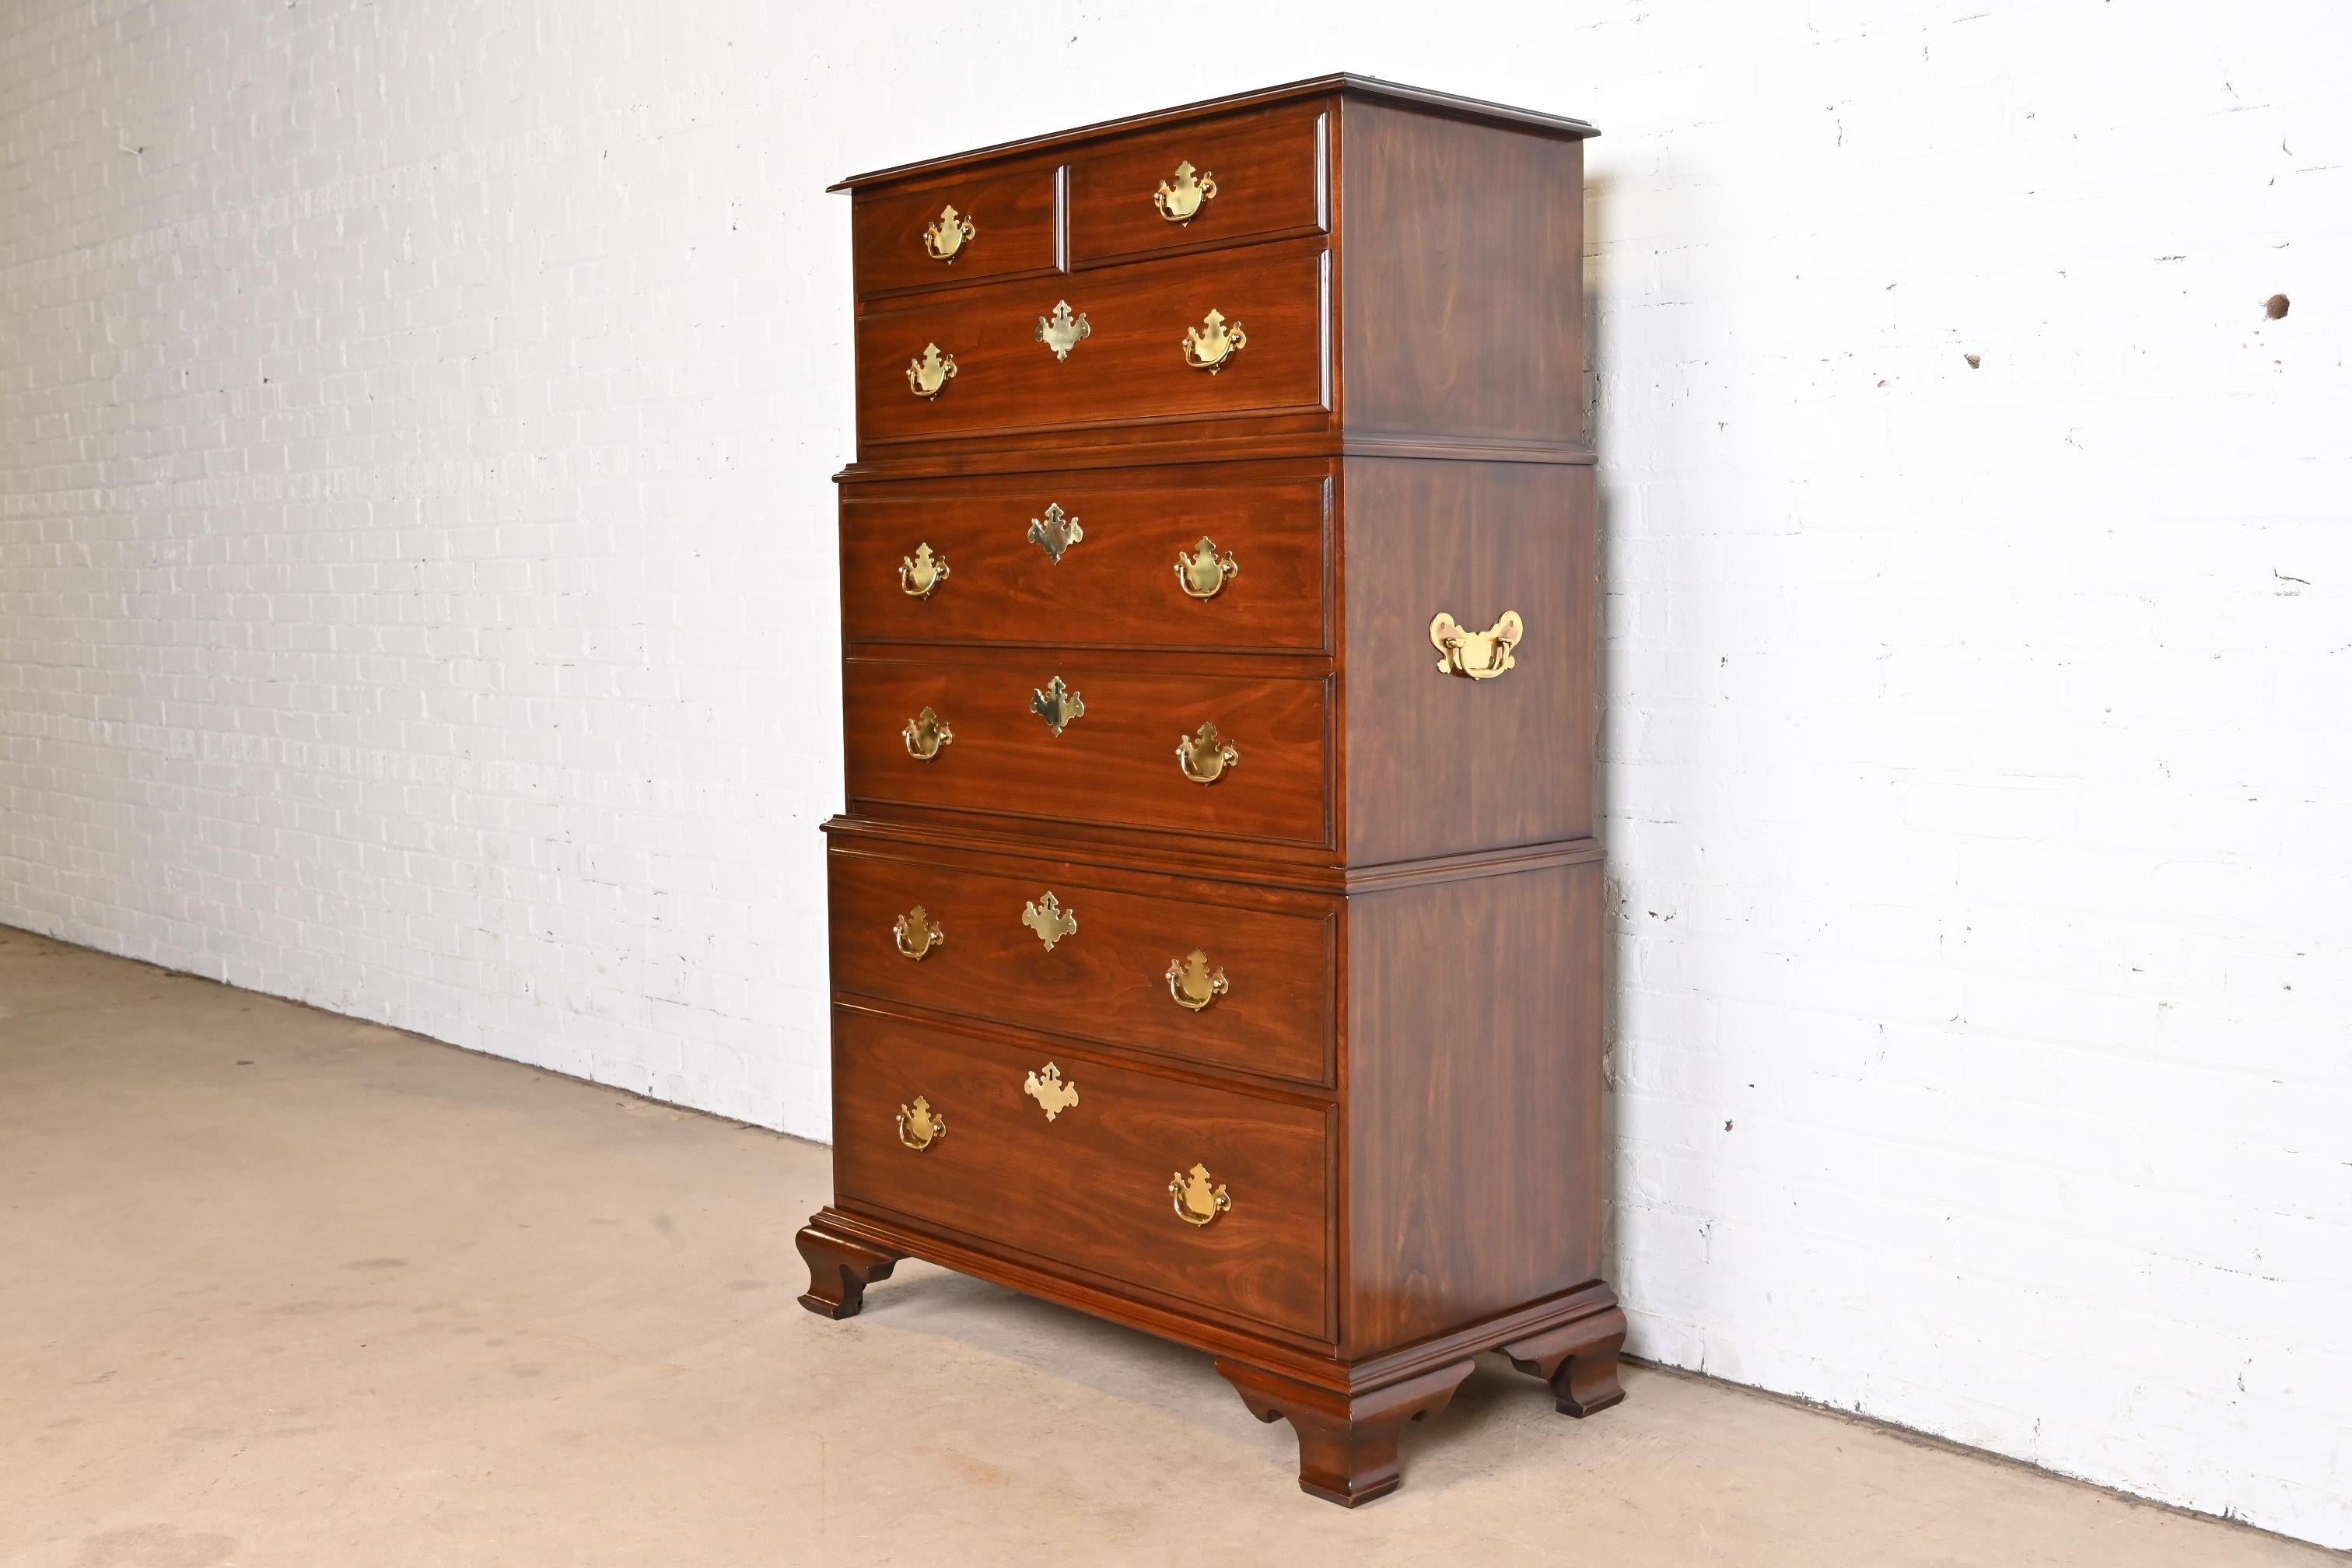 Harden Furniture Georgian Cherry Wood Triple Chest-on-chest Highboy Dresser In Good Condition For Sale In South Bend, IN